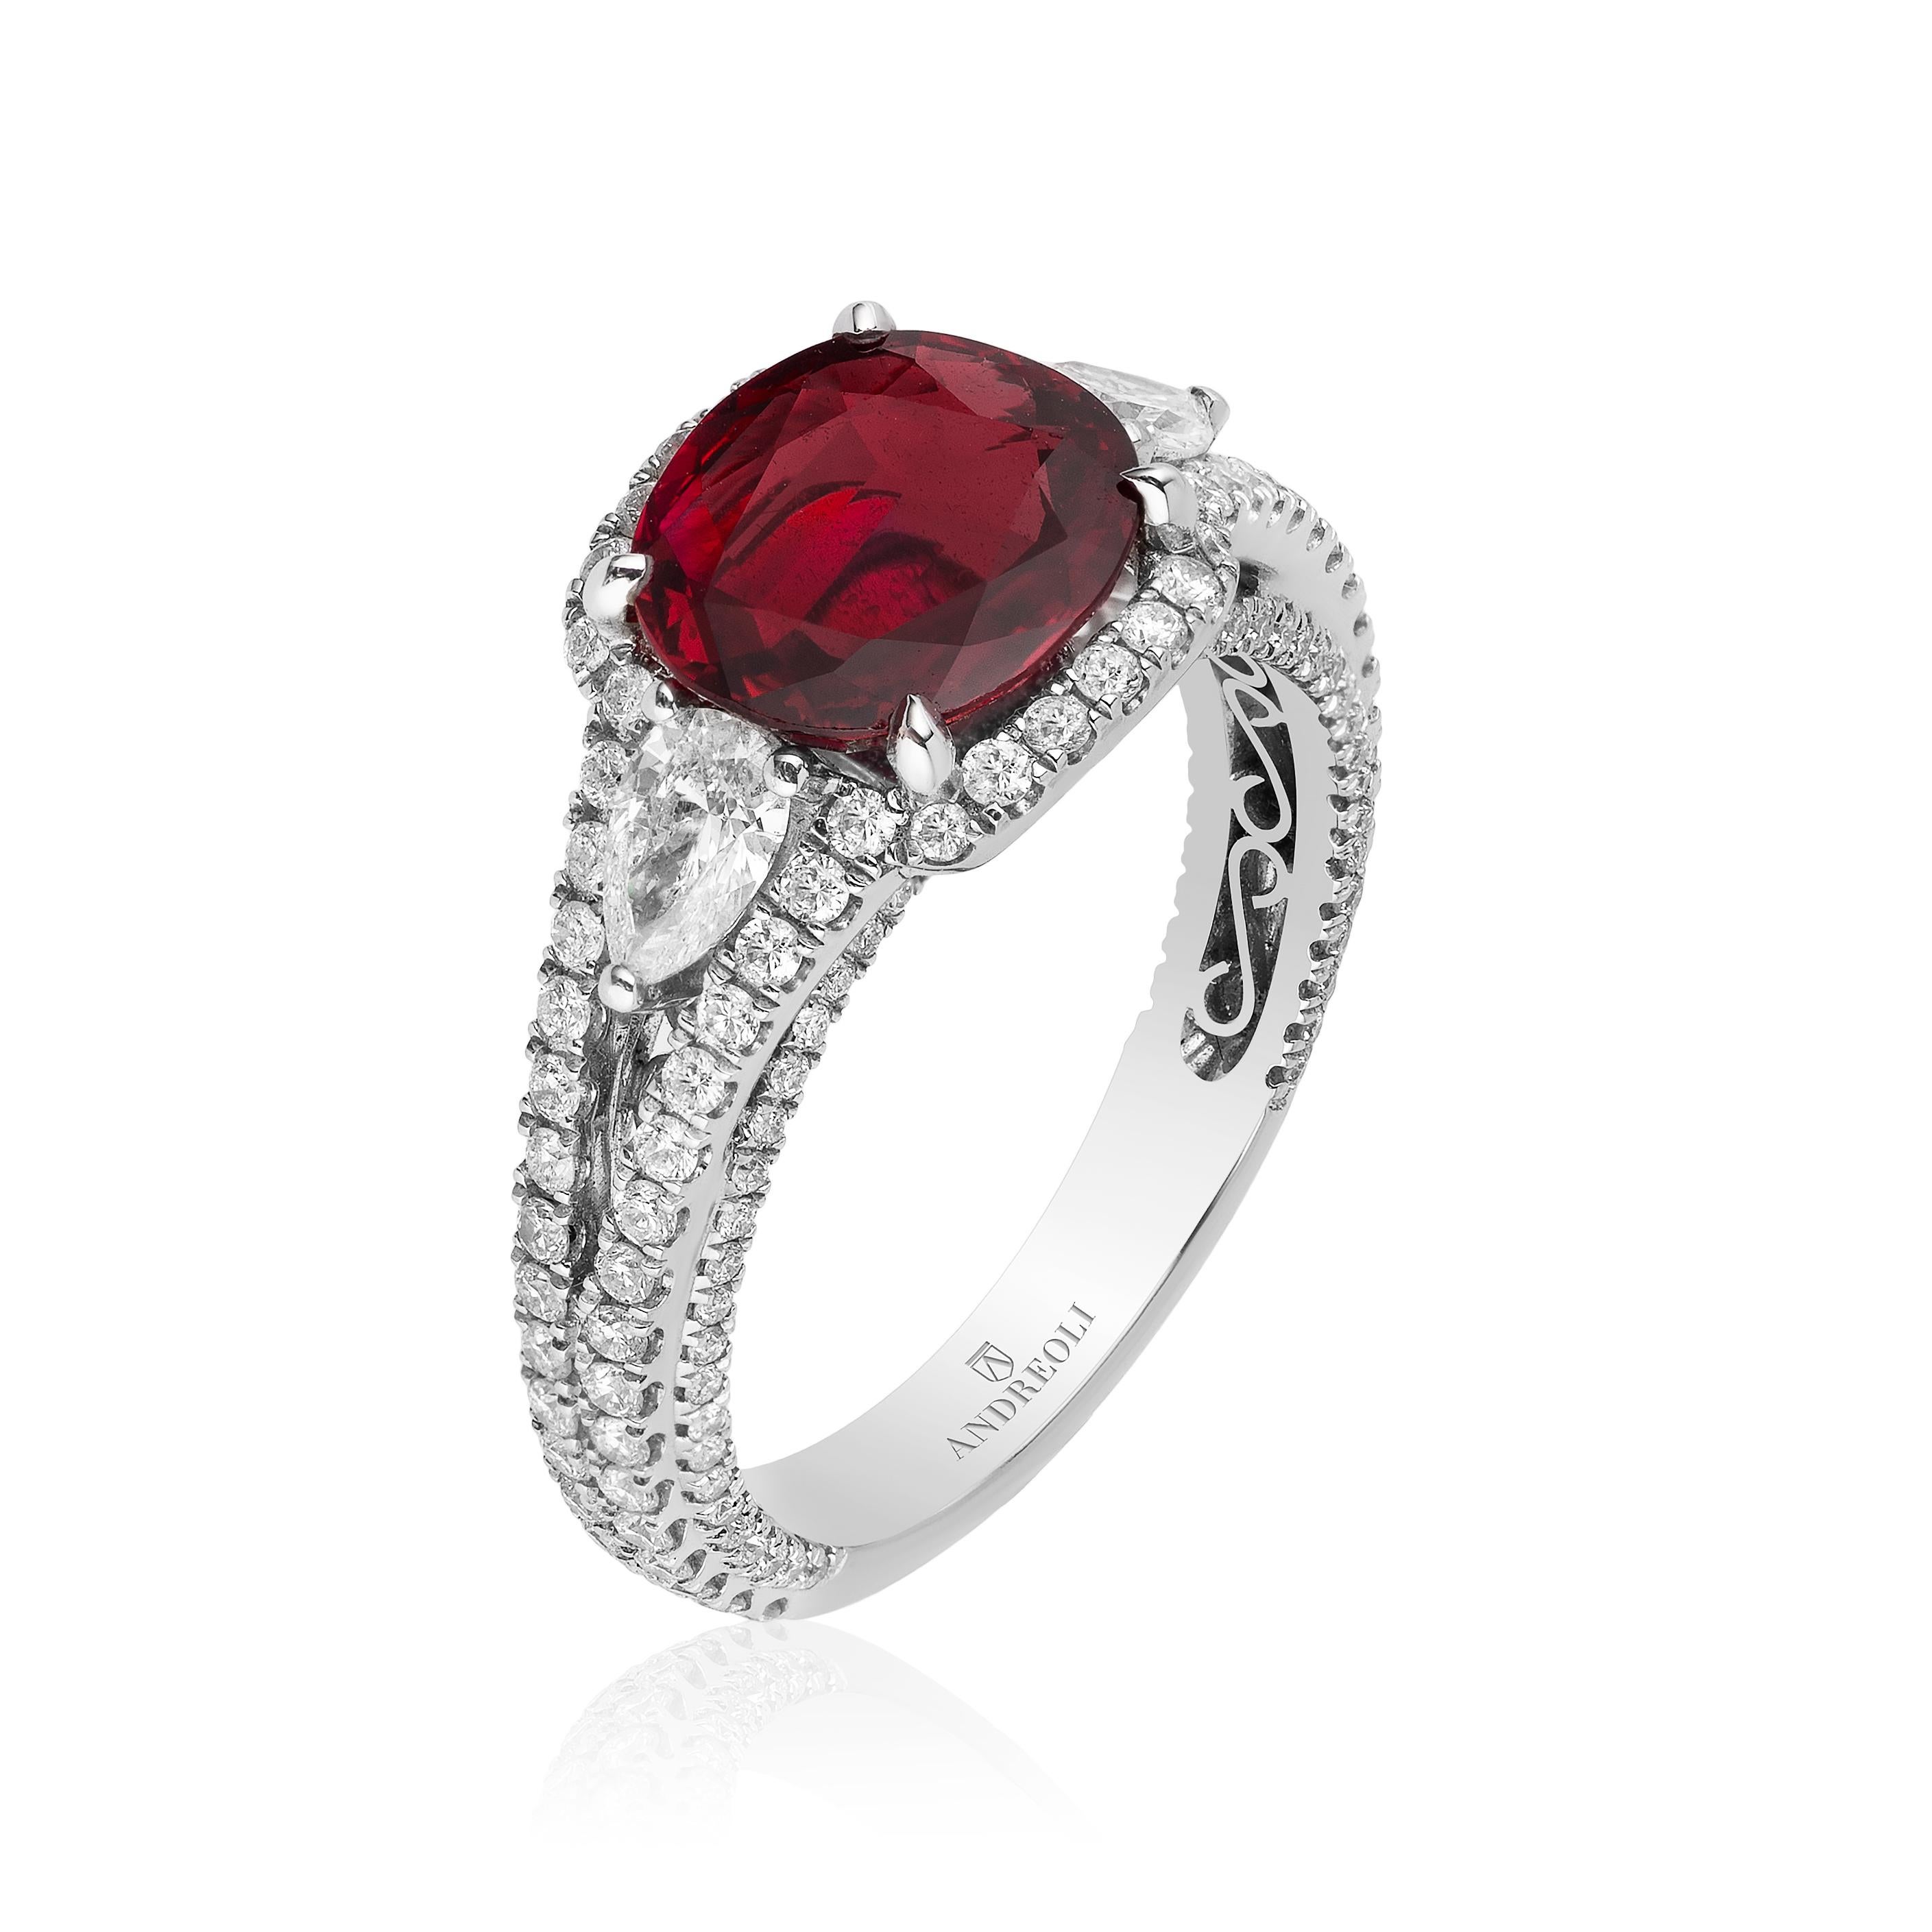 Oval Cut Andreoli GIA Certified 1.98 Carat Pigeon Blood Ruby Thailand Diamond Ring 